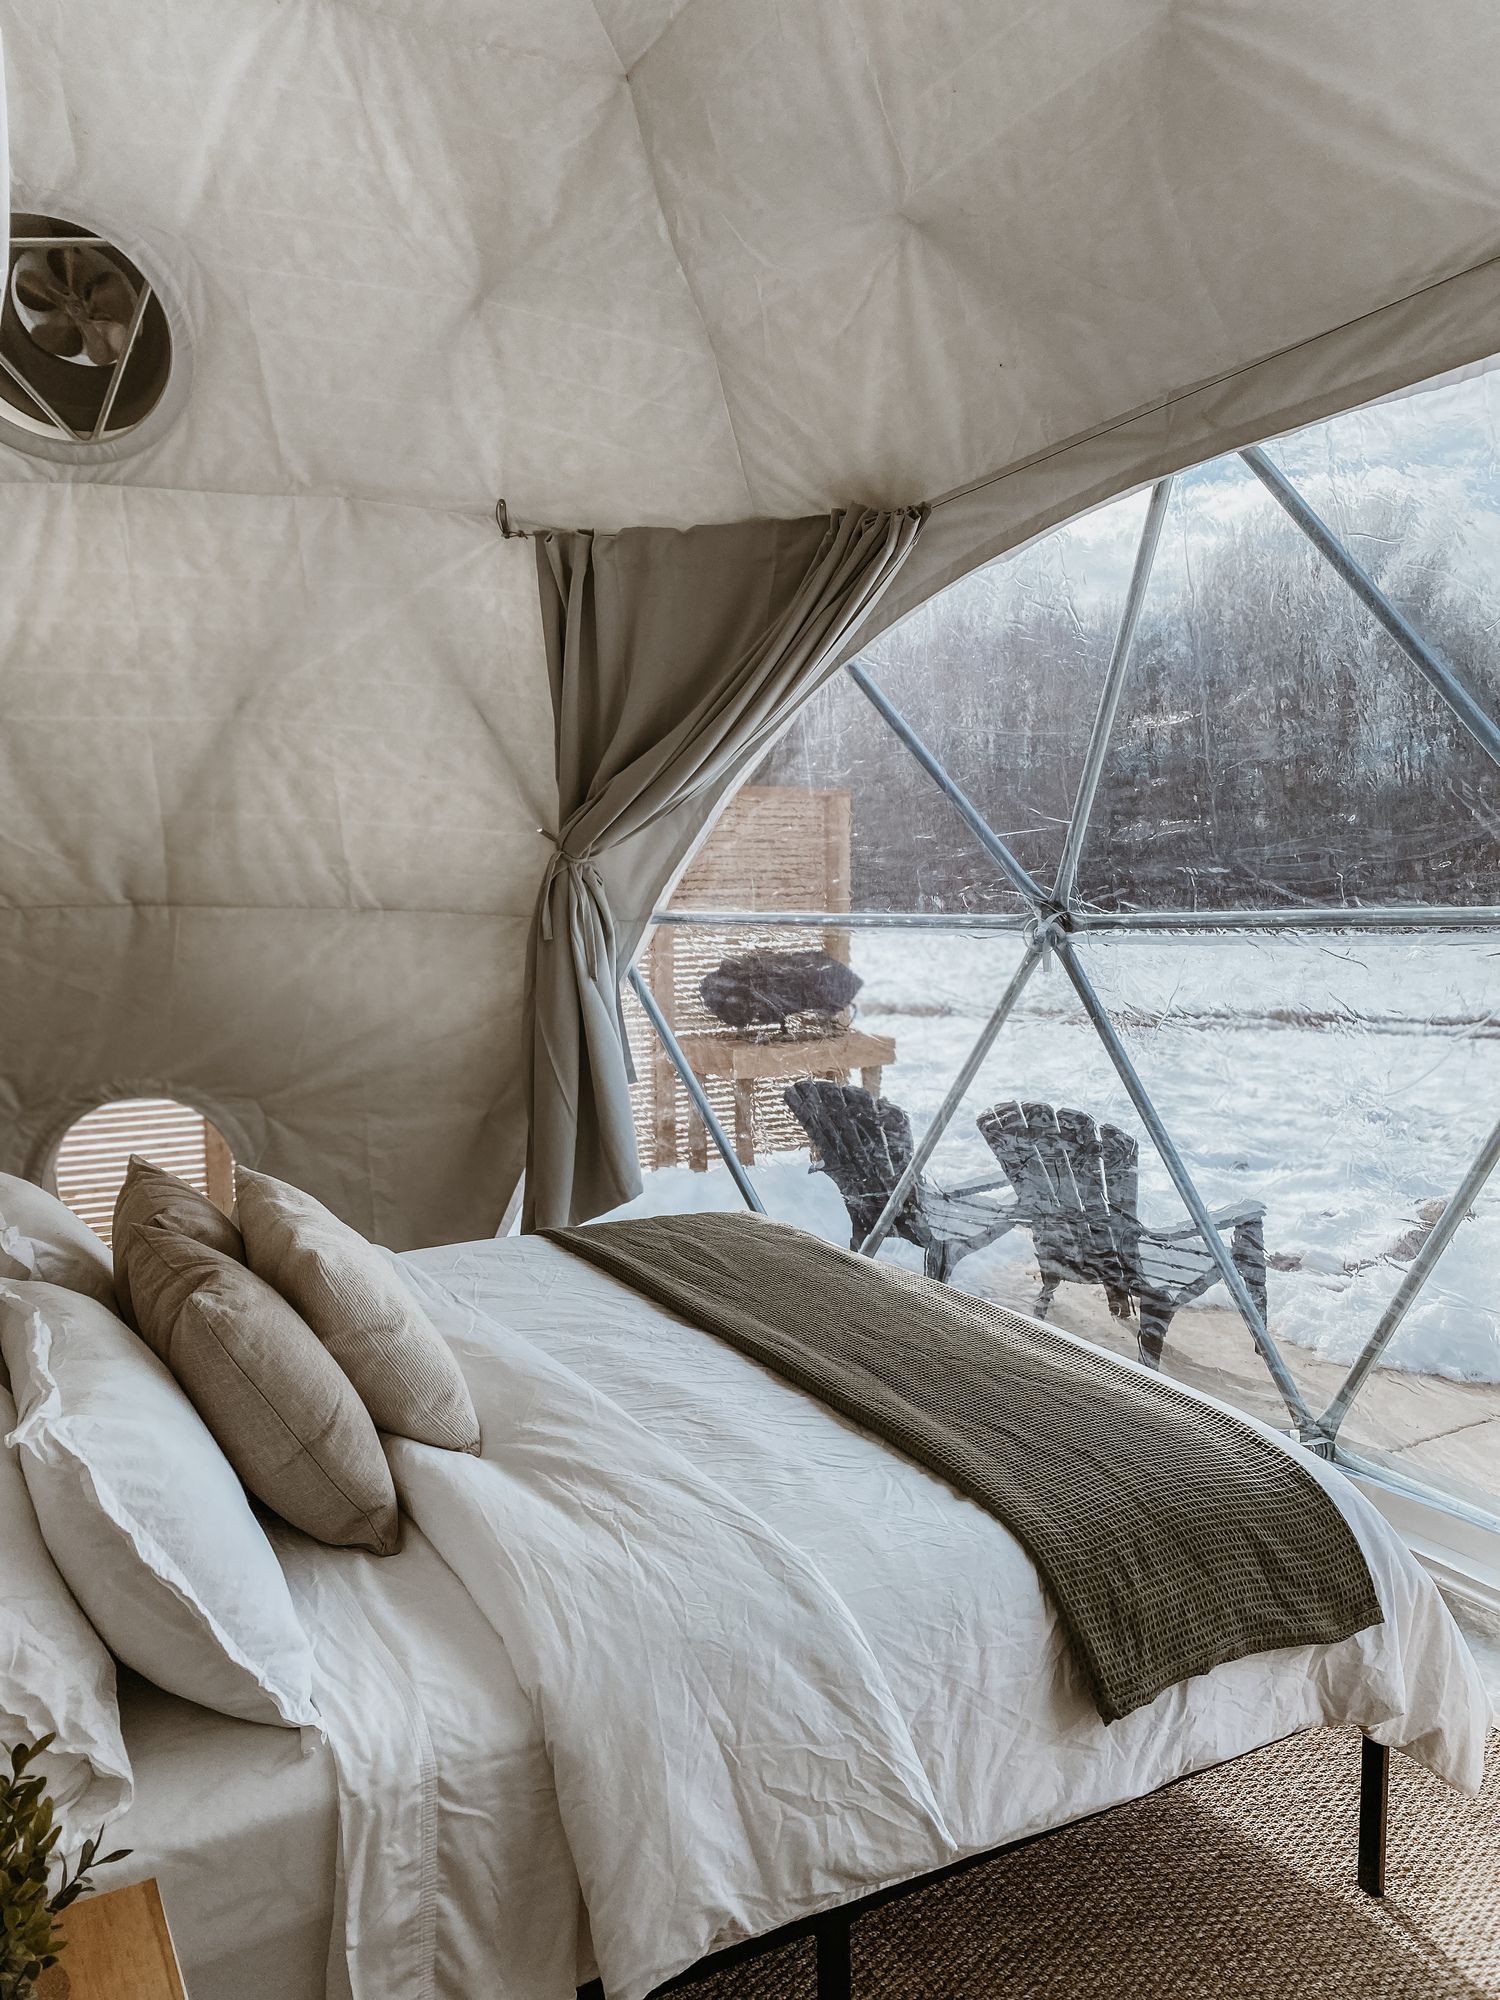 a bed in a dome with a view of a lake .